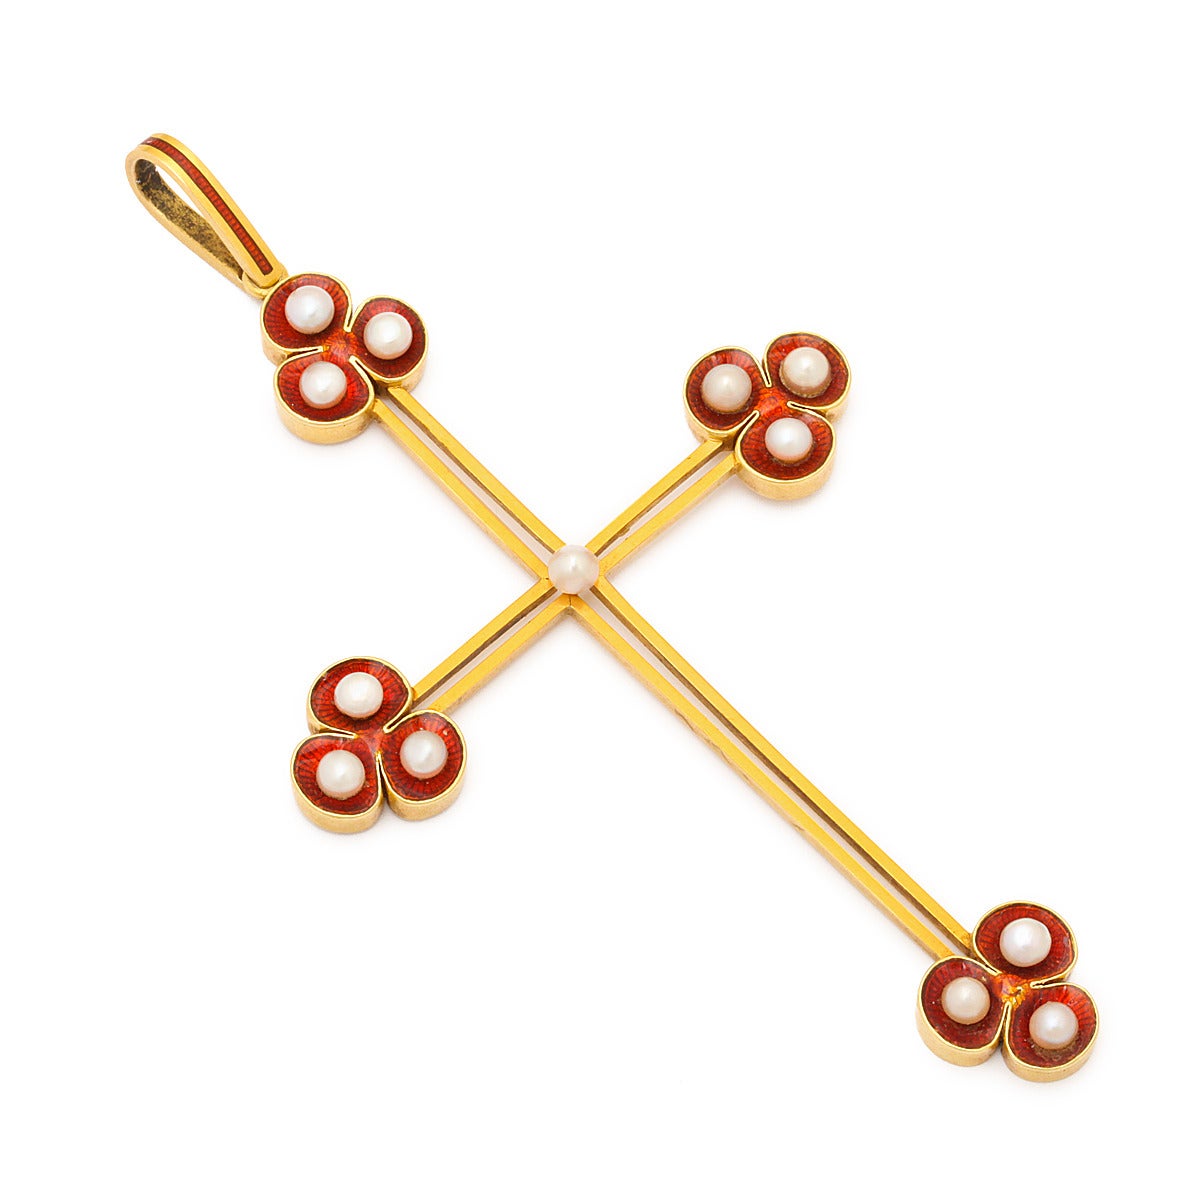 Large 15k gold cross pendant decorated with red enamel and natural pearls.

English, ca. 1890, probably by Robert Phillips
Length: 4 1/2 inches with bail